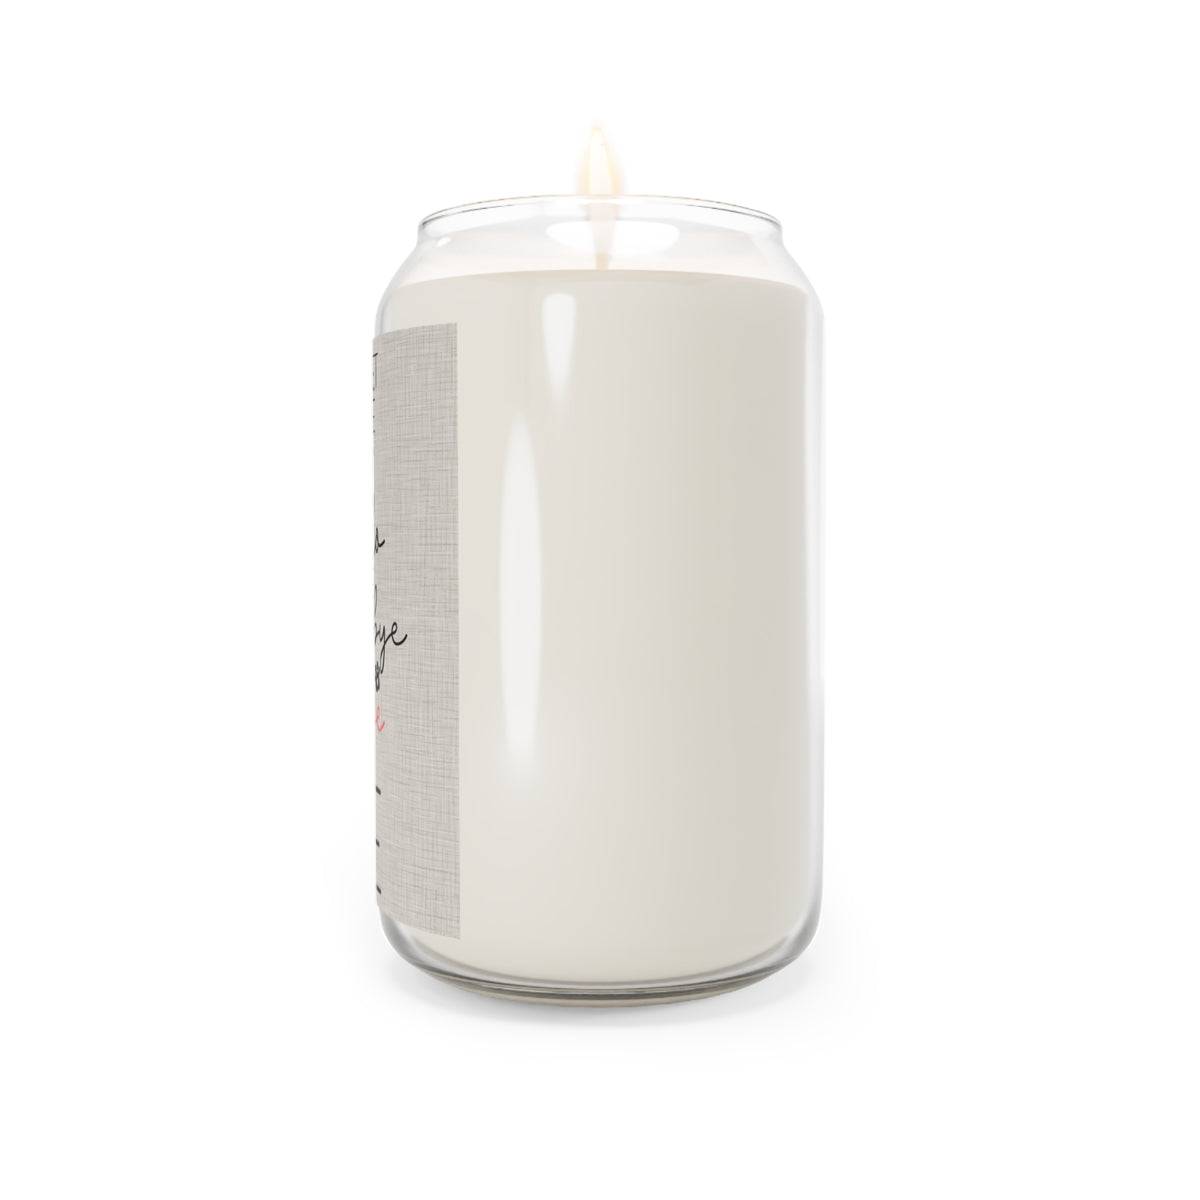 There is Love Pet Memorial Scented Candle, 13.75oz